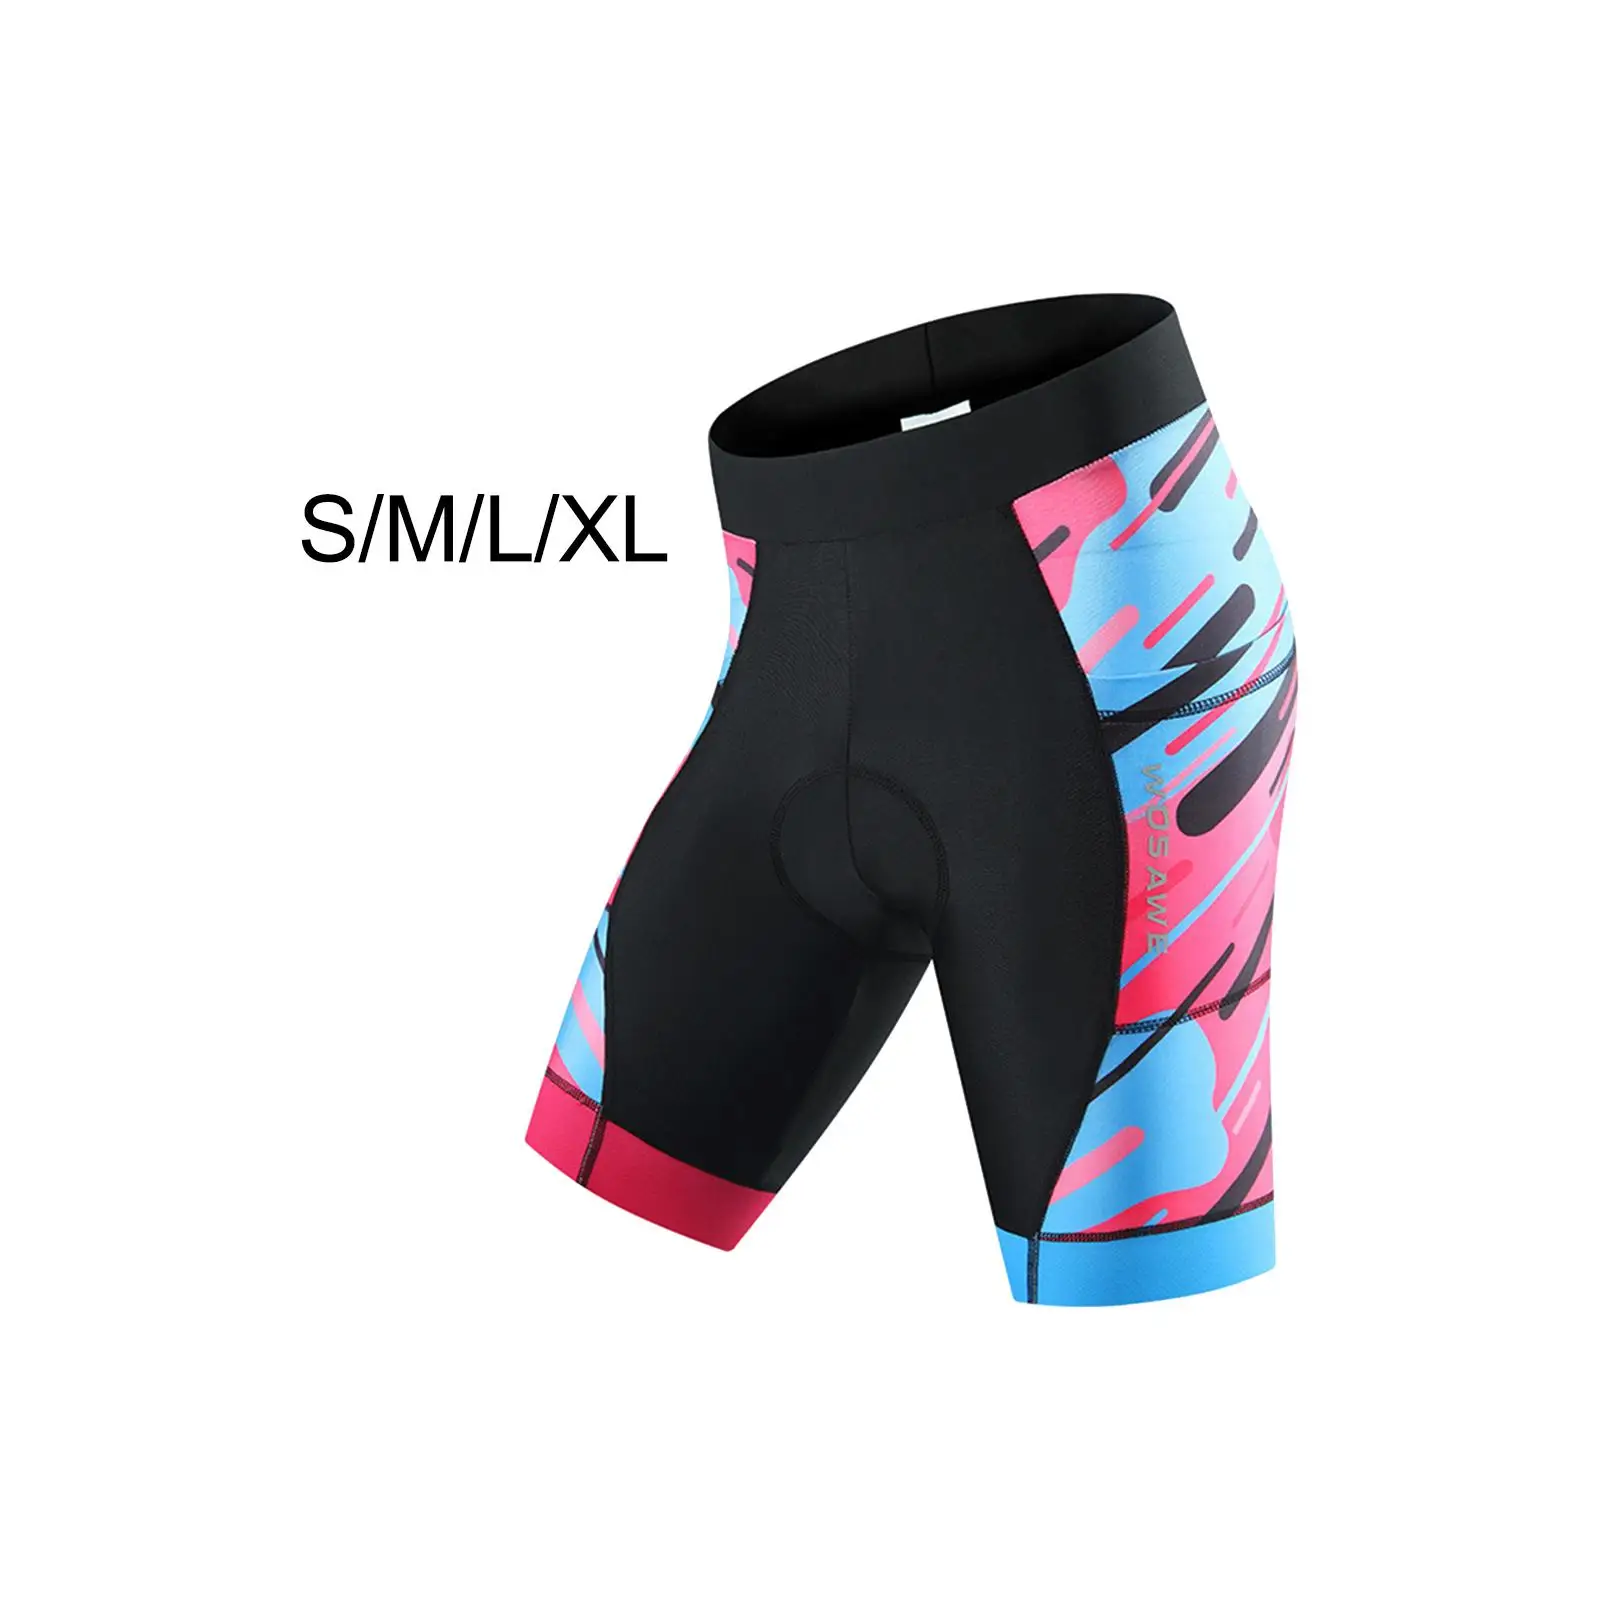 Biker Shorts for Women Fitness Activewear Comfort Necessities Cycling Underwear for Bike Sports Mountain Exercise Volleyball